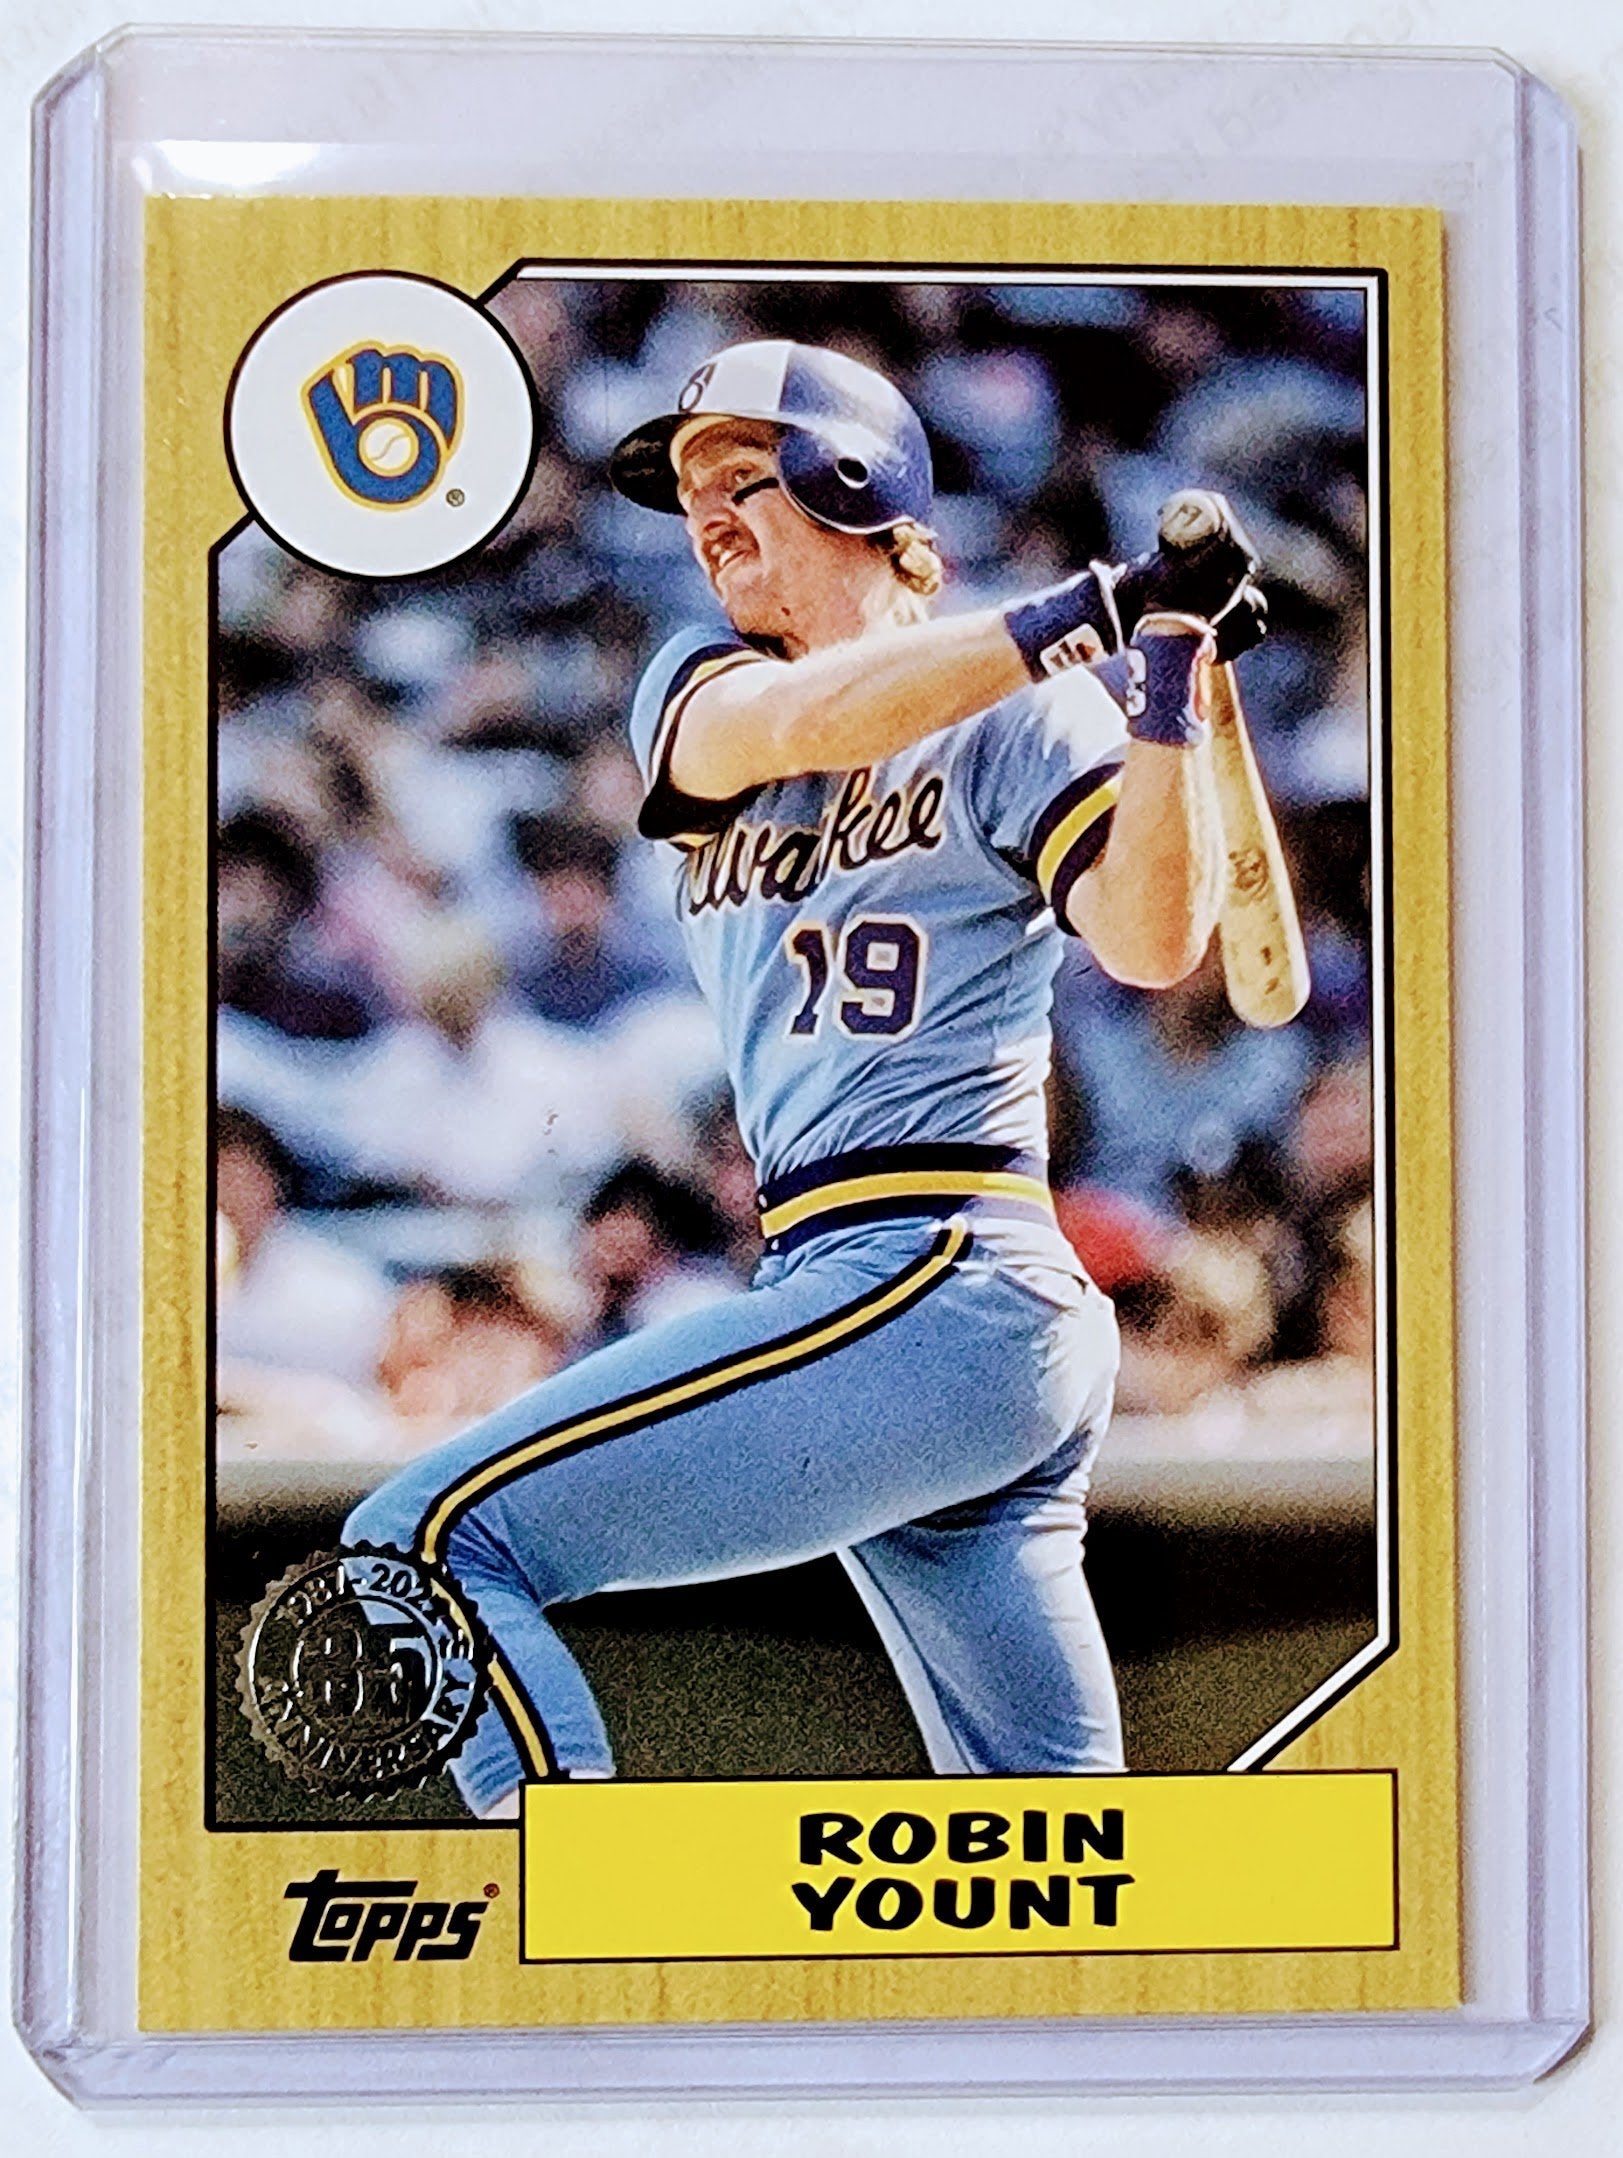  1981 Topps # 515 Robin Yount Milwaukee Brewers (Baseball Card)  NM Brewers : Collectibles & Fine Art